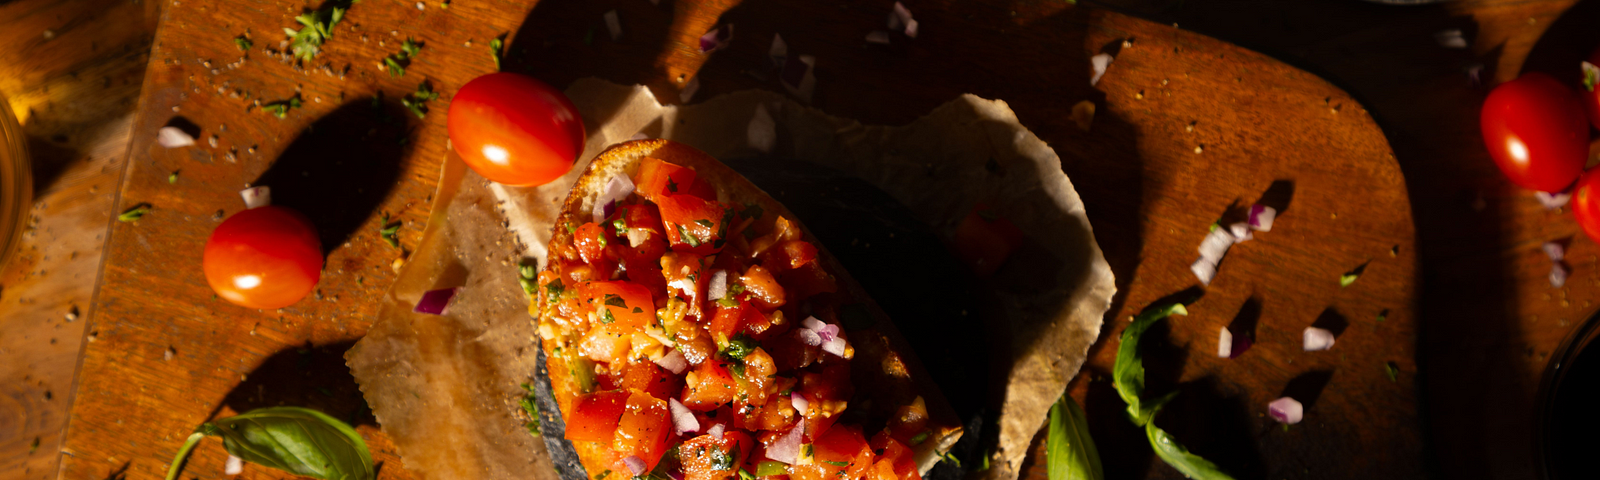 Bruschetta: A Delicious Blue Zones-Inspired Appetizer on a cutting board